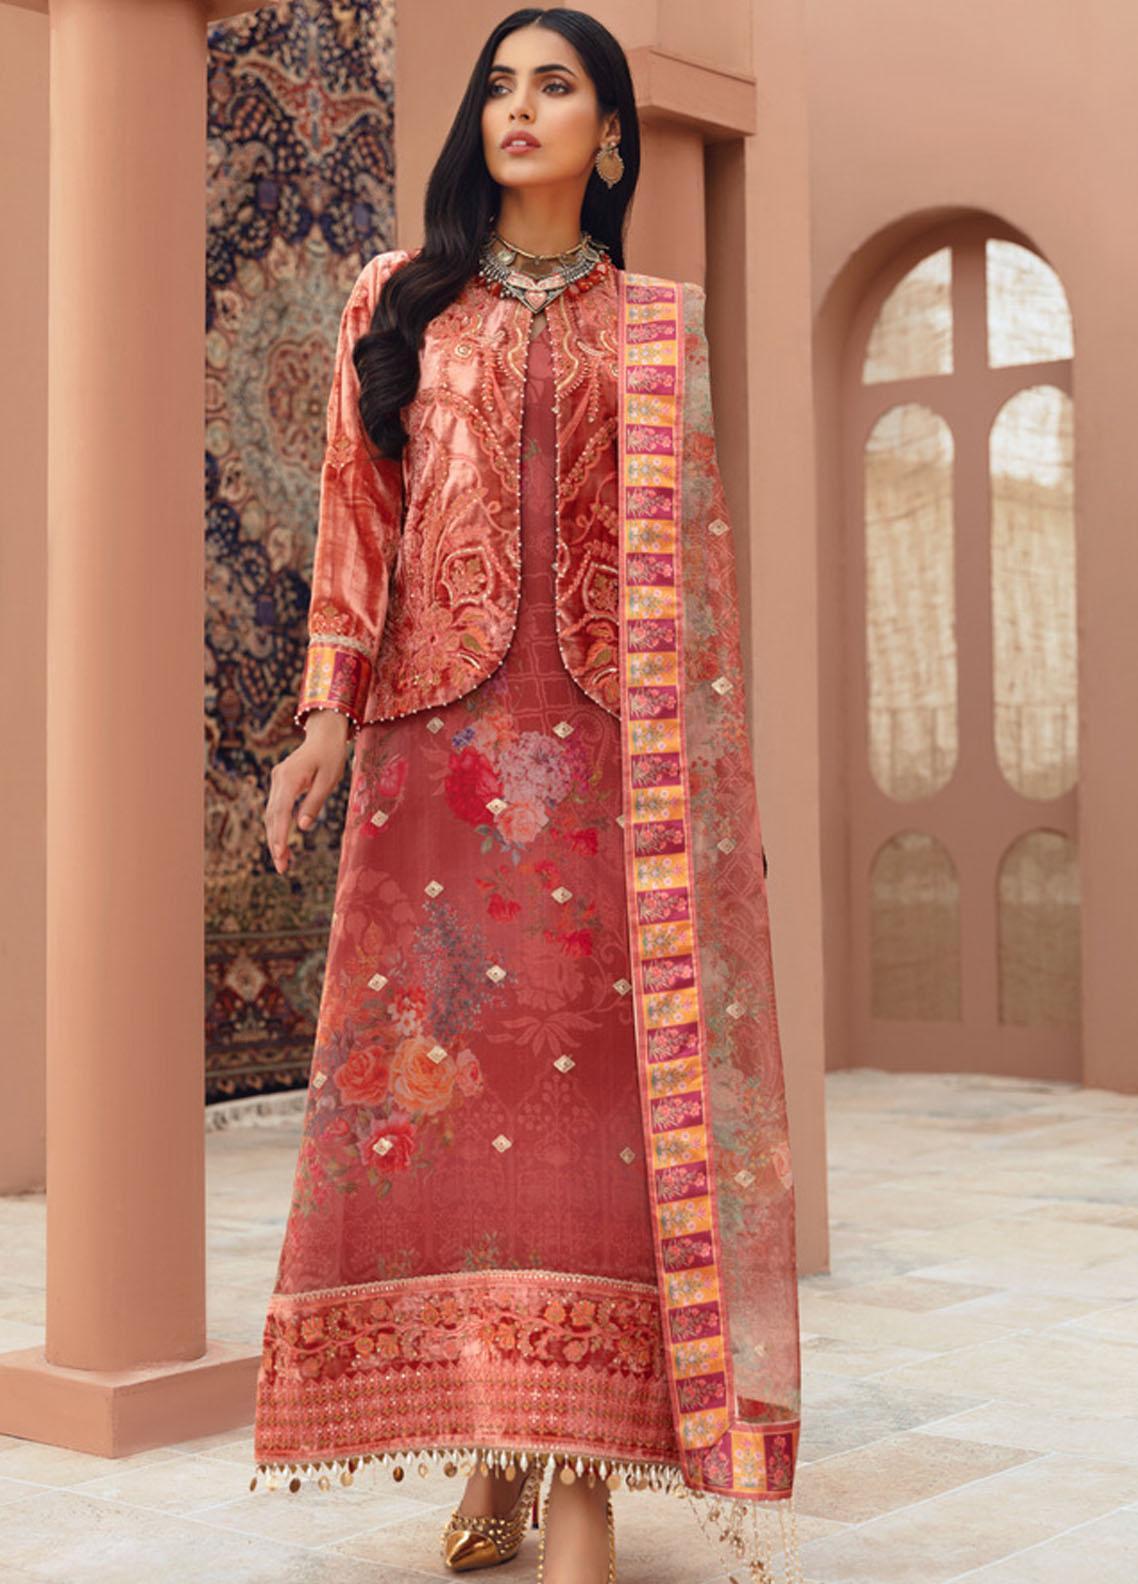 Noor by Saadia Asad Embroidered Velvet Suits Unstitched 3 Piece SA21NS D-04 - Winter Collection